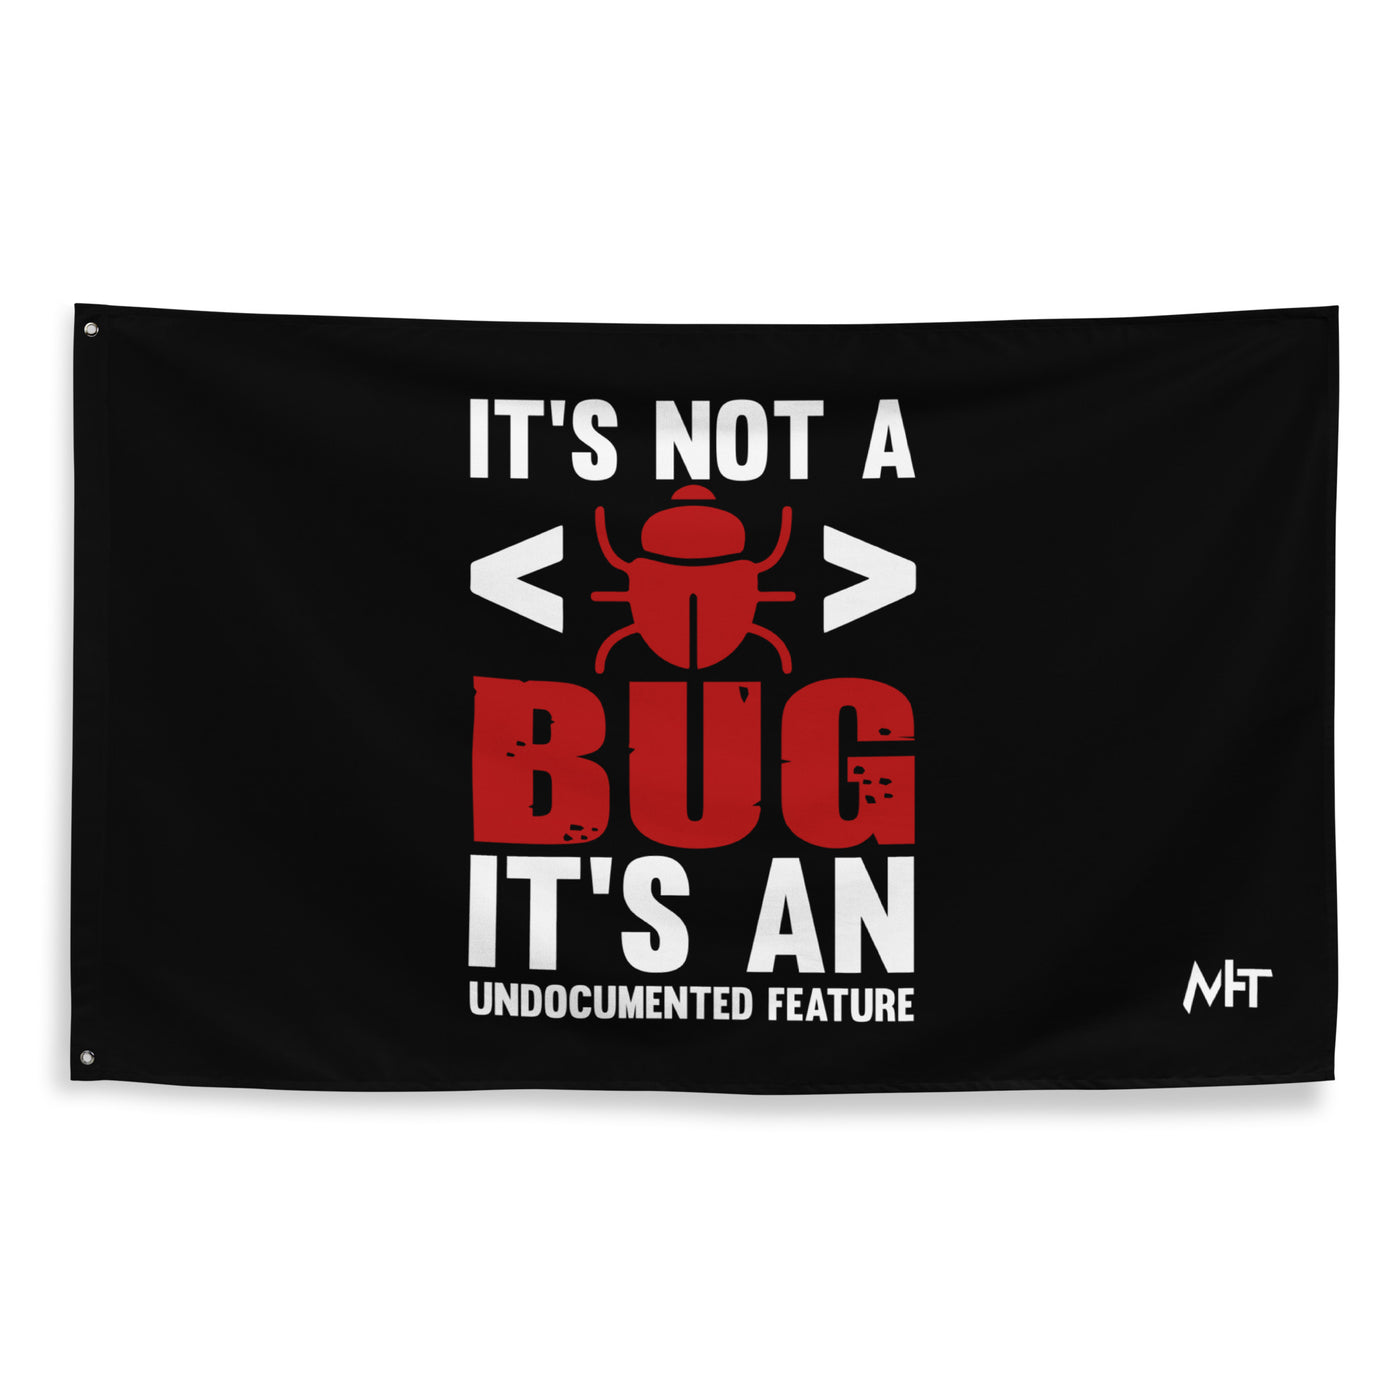 It's not a Bug; it's an Undocumented Feature - Flag